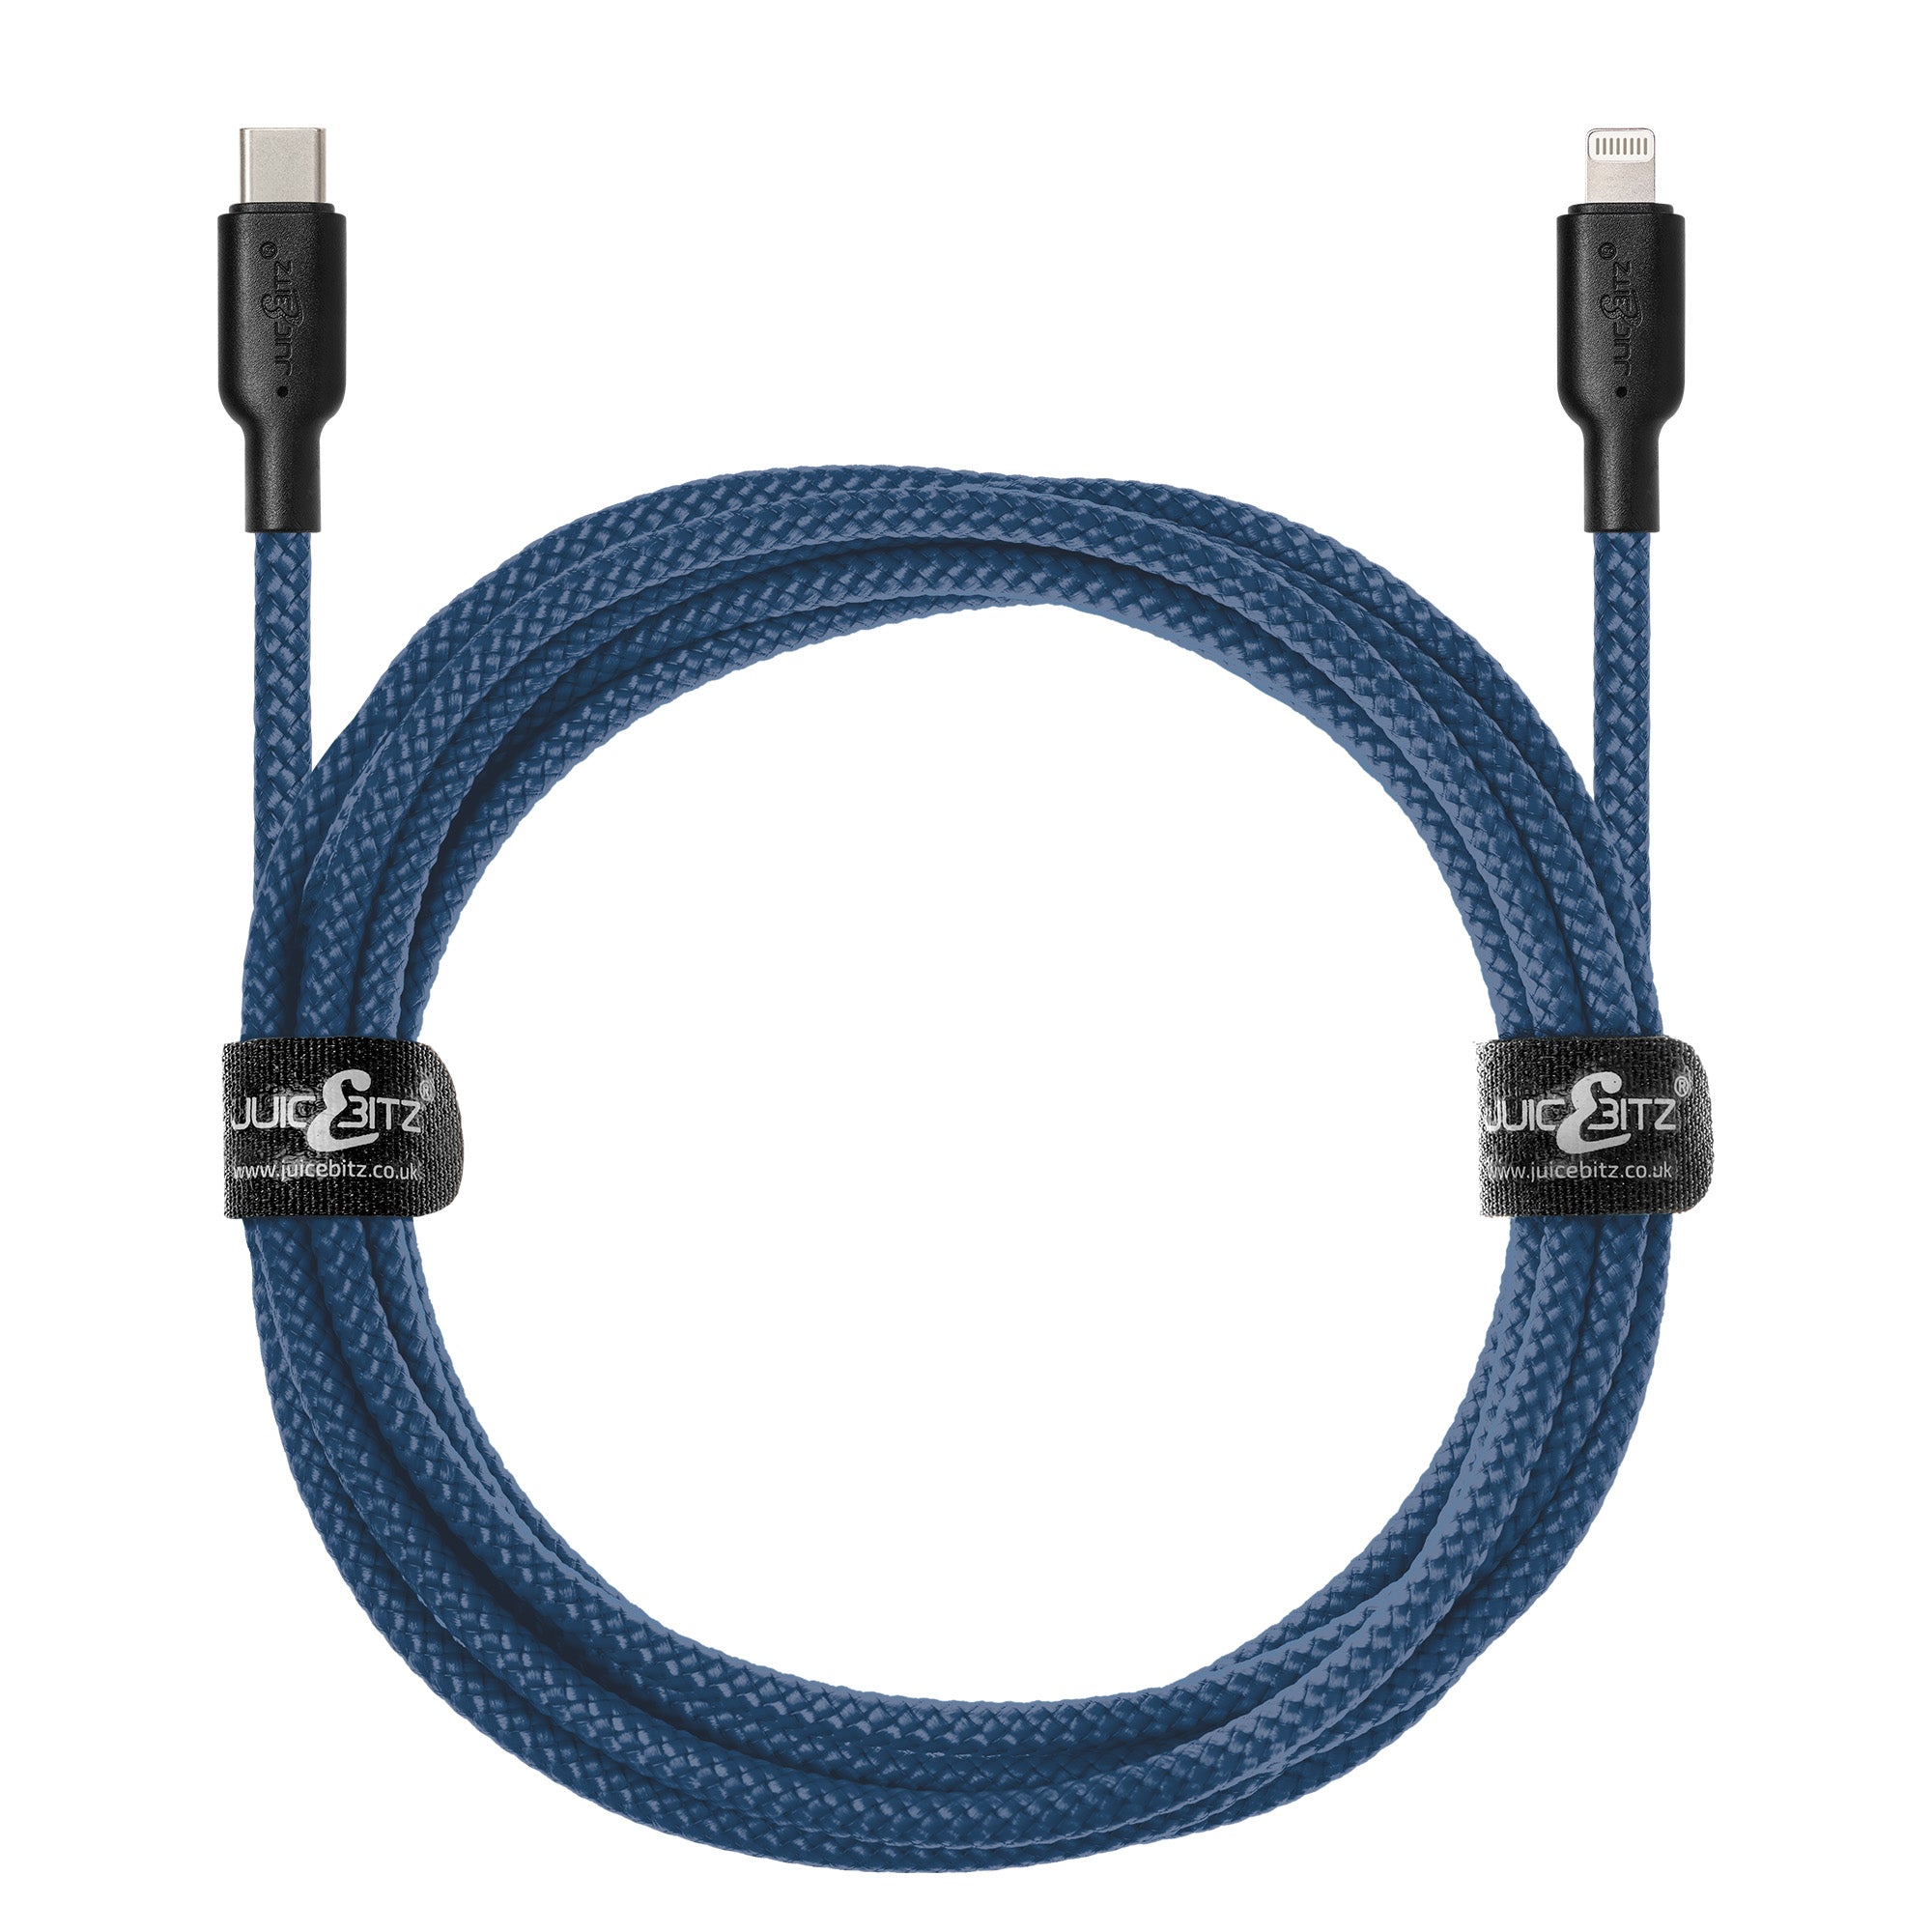 Braided Heavy Duty USB-C Fast Charger Data Sync Cable for iPhone, iPad, iPod - Navy